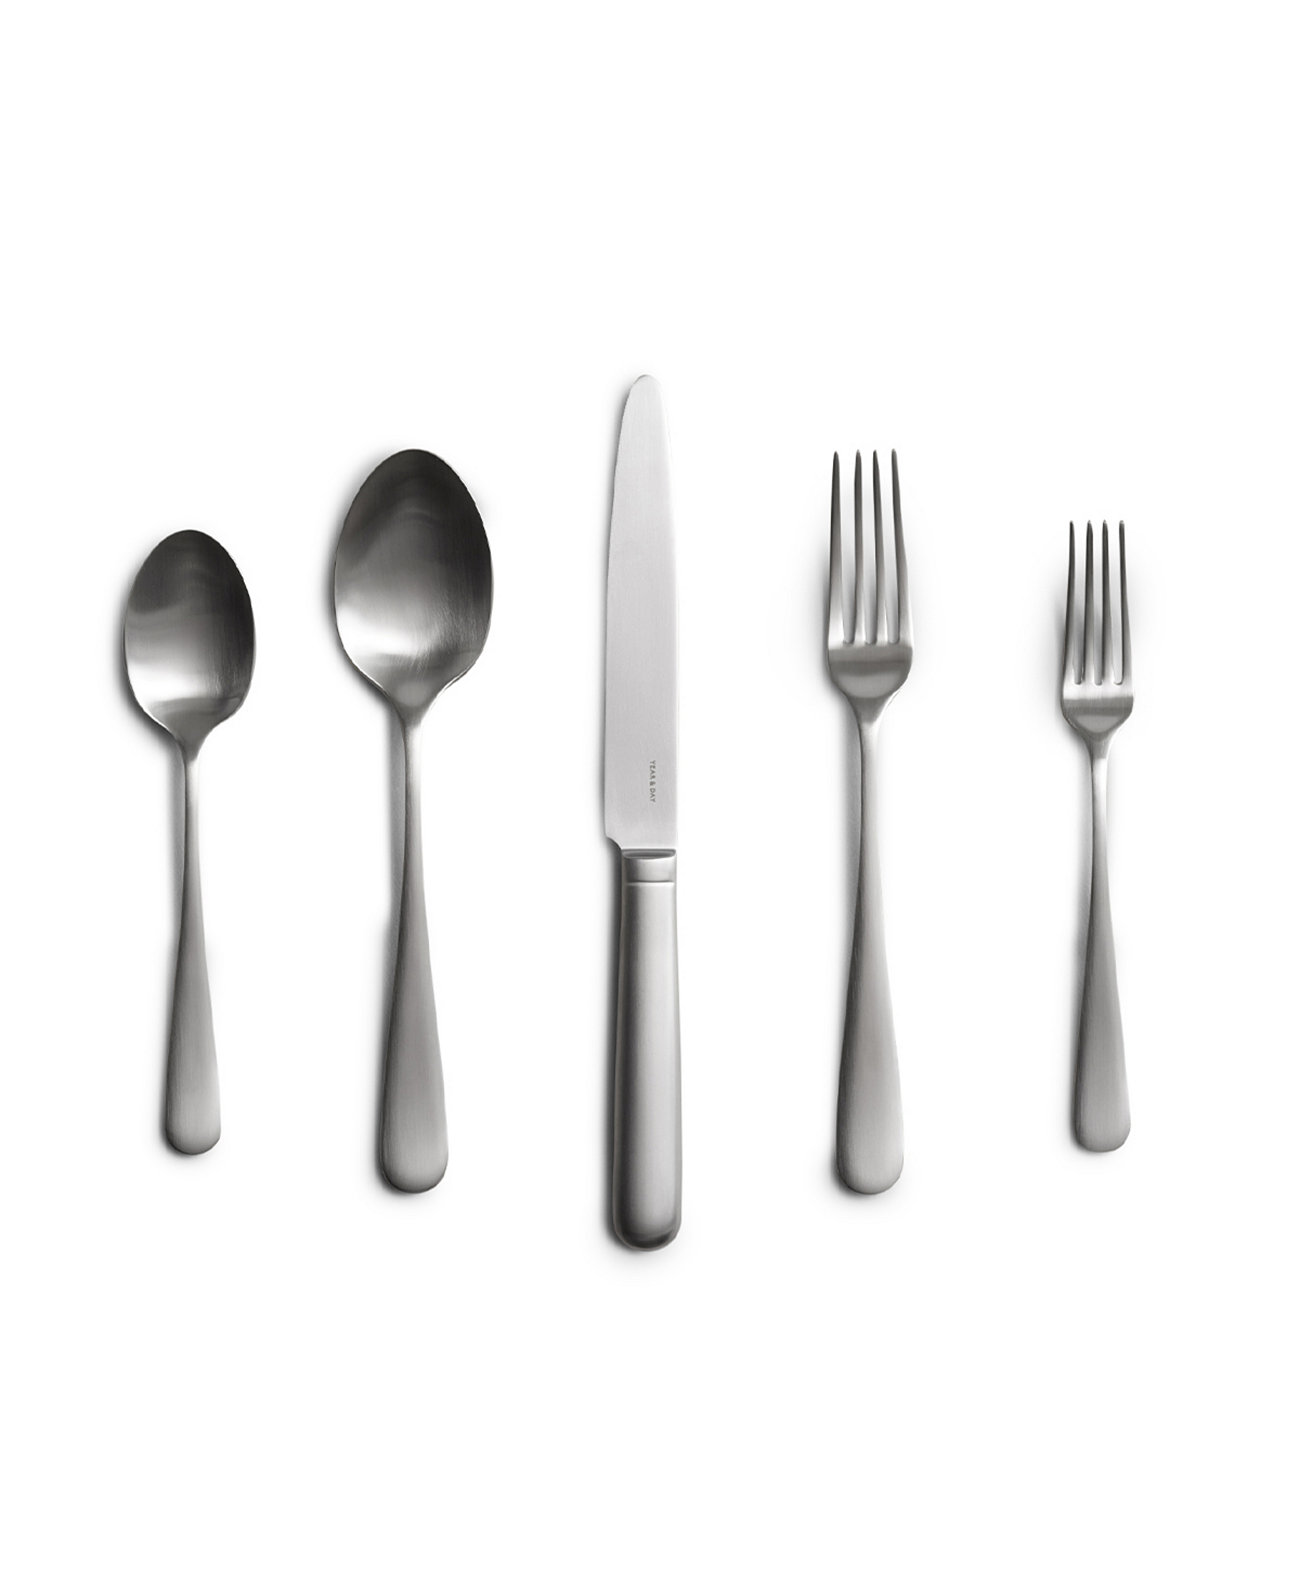 20-Pc Flatware Set, Service for 4 Year & Day